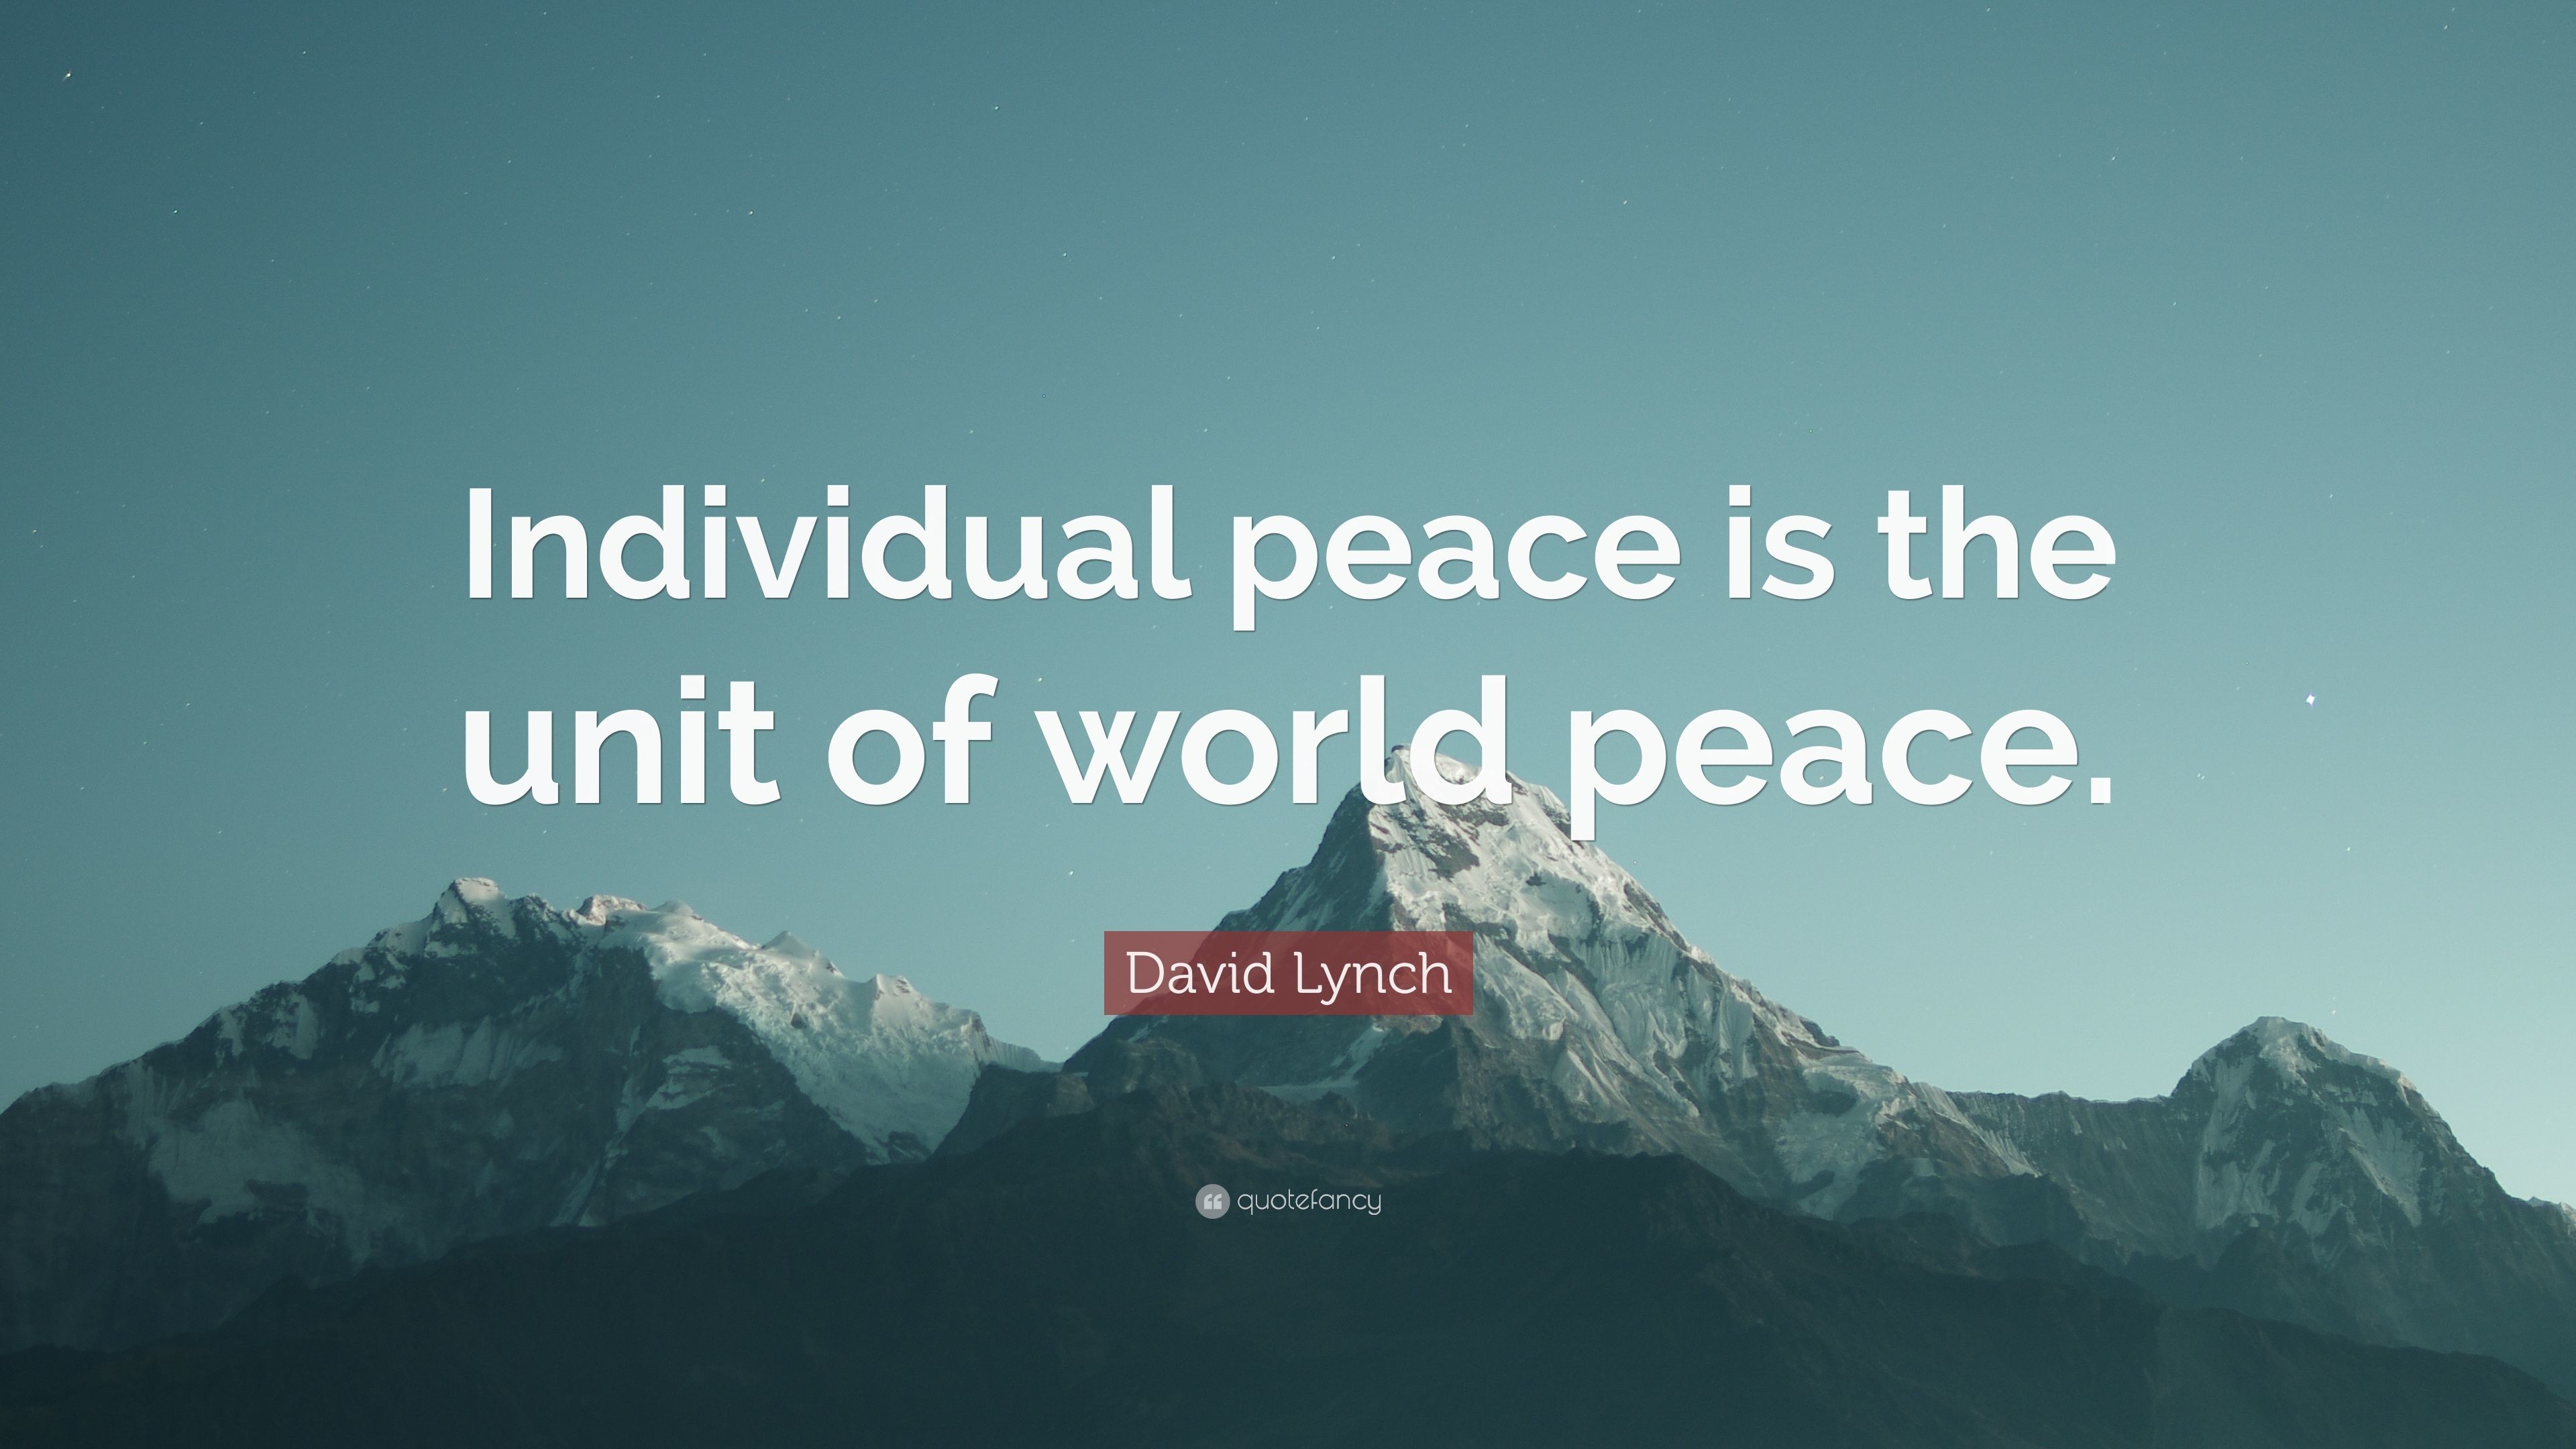 3840x2160 David Lynch Quote: “Individual peace is the unit of world peace.”